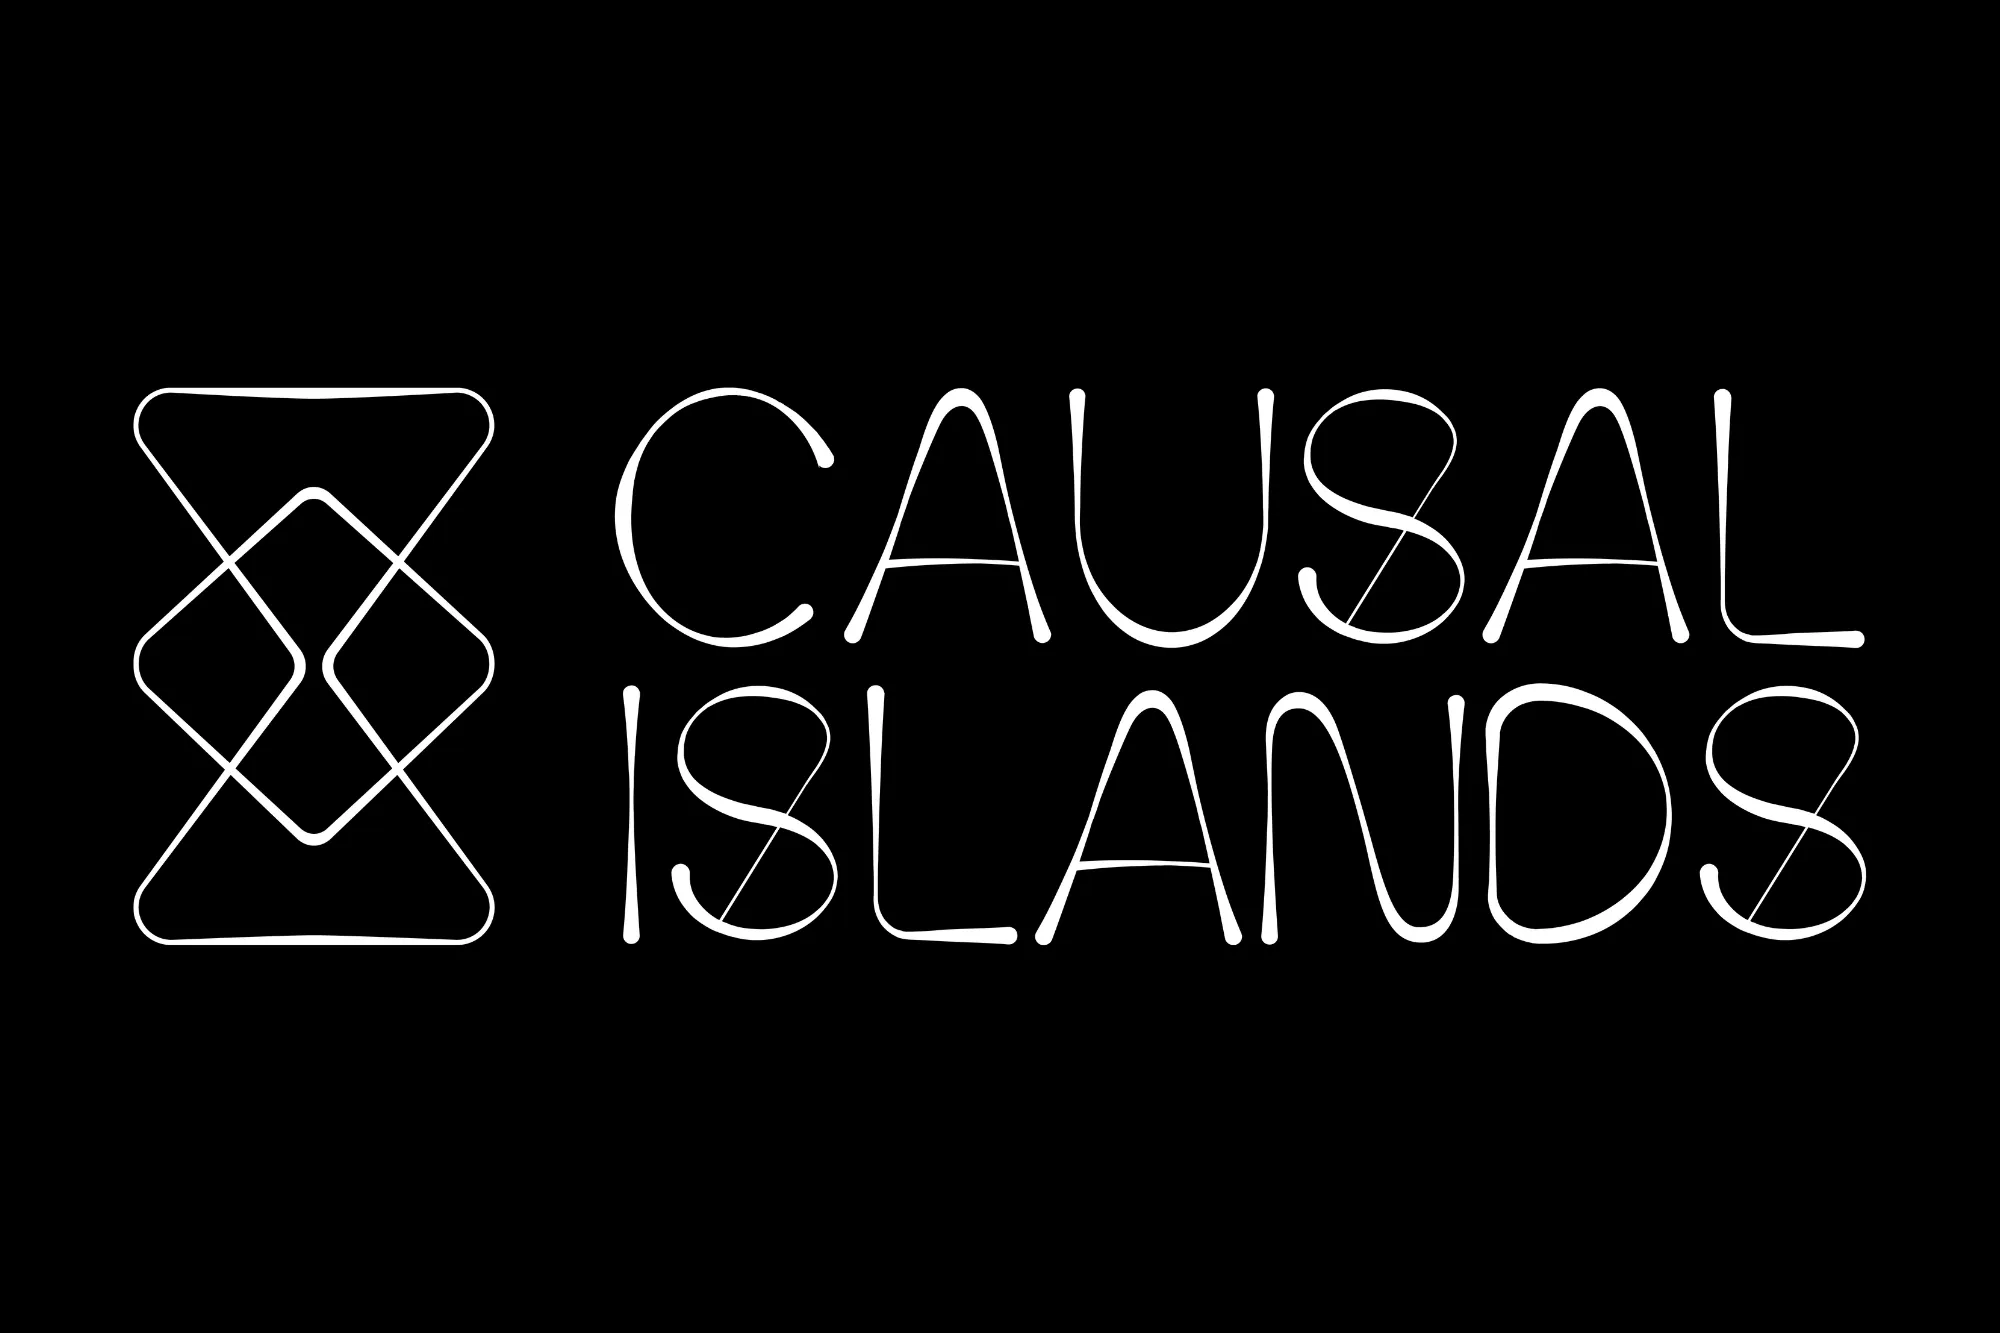 Causal Islands: The Future of Computing Conference